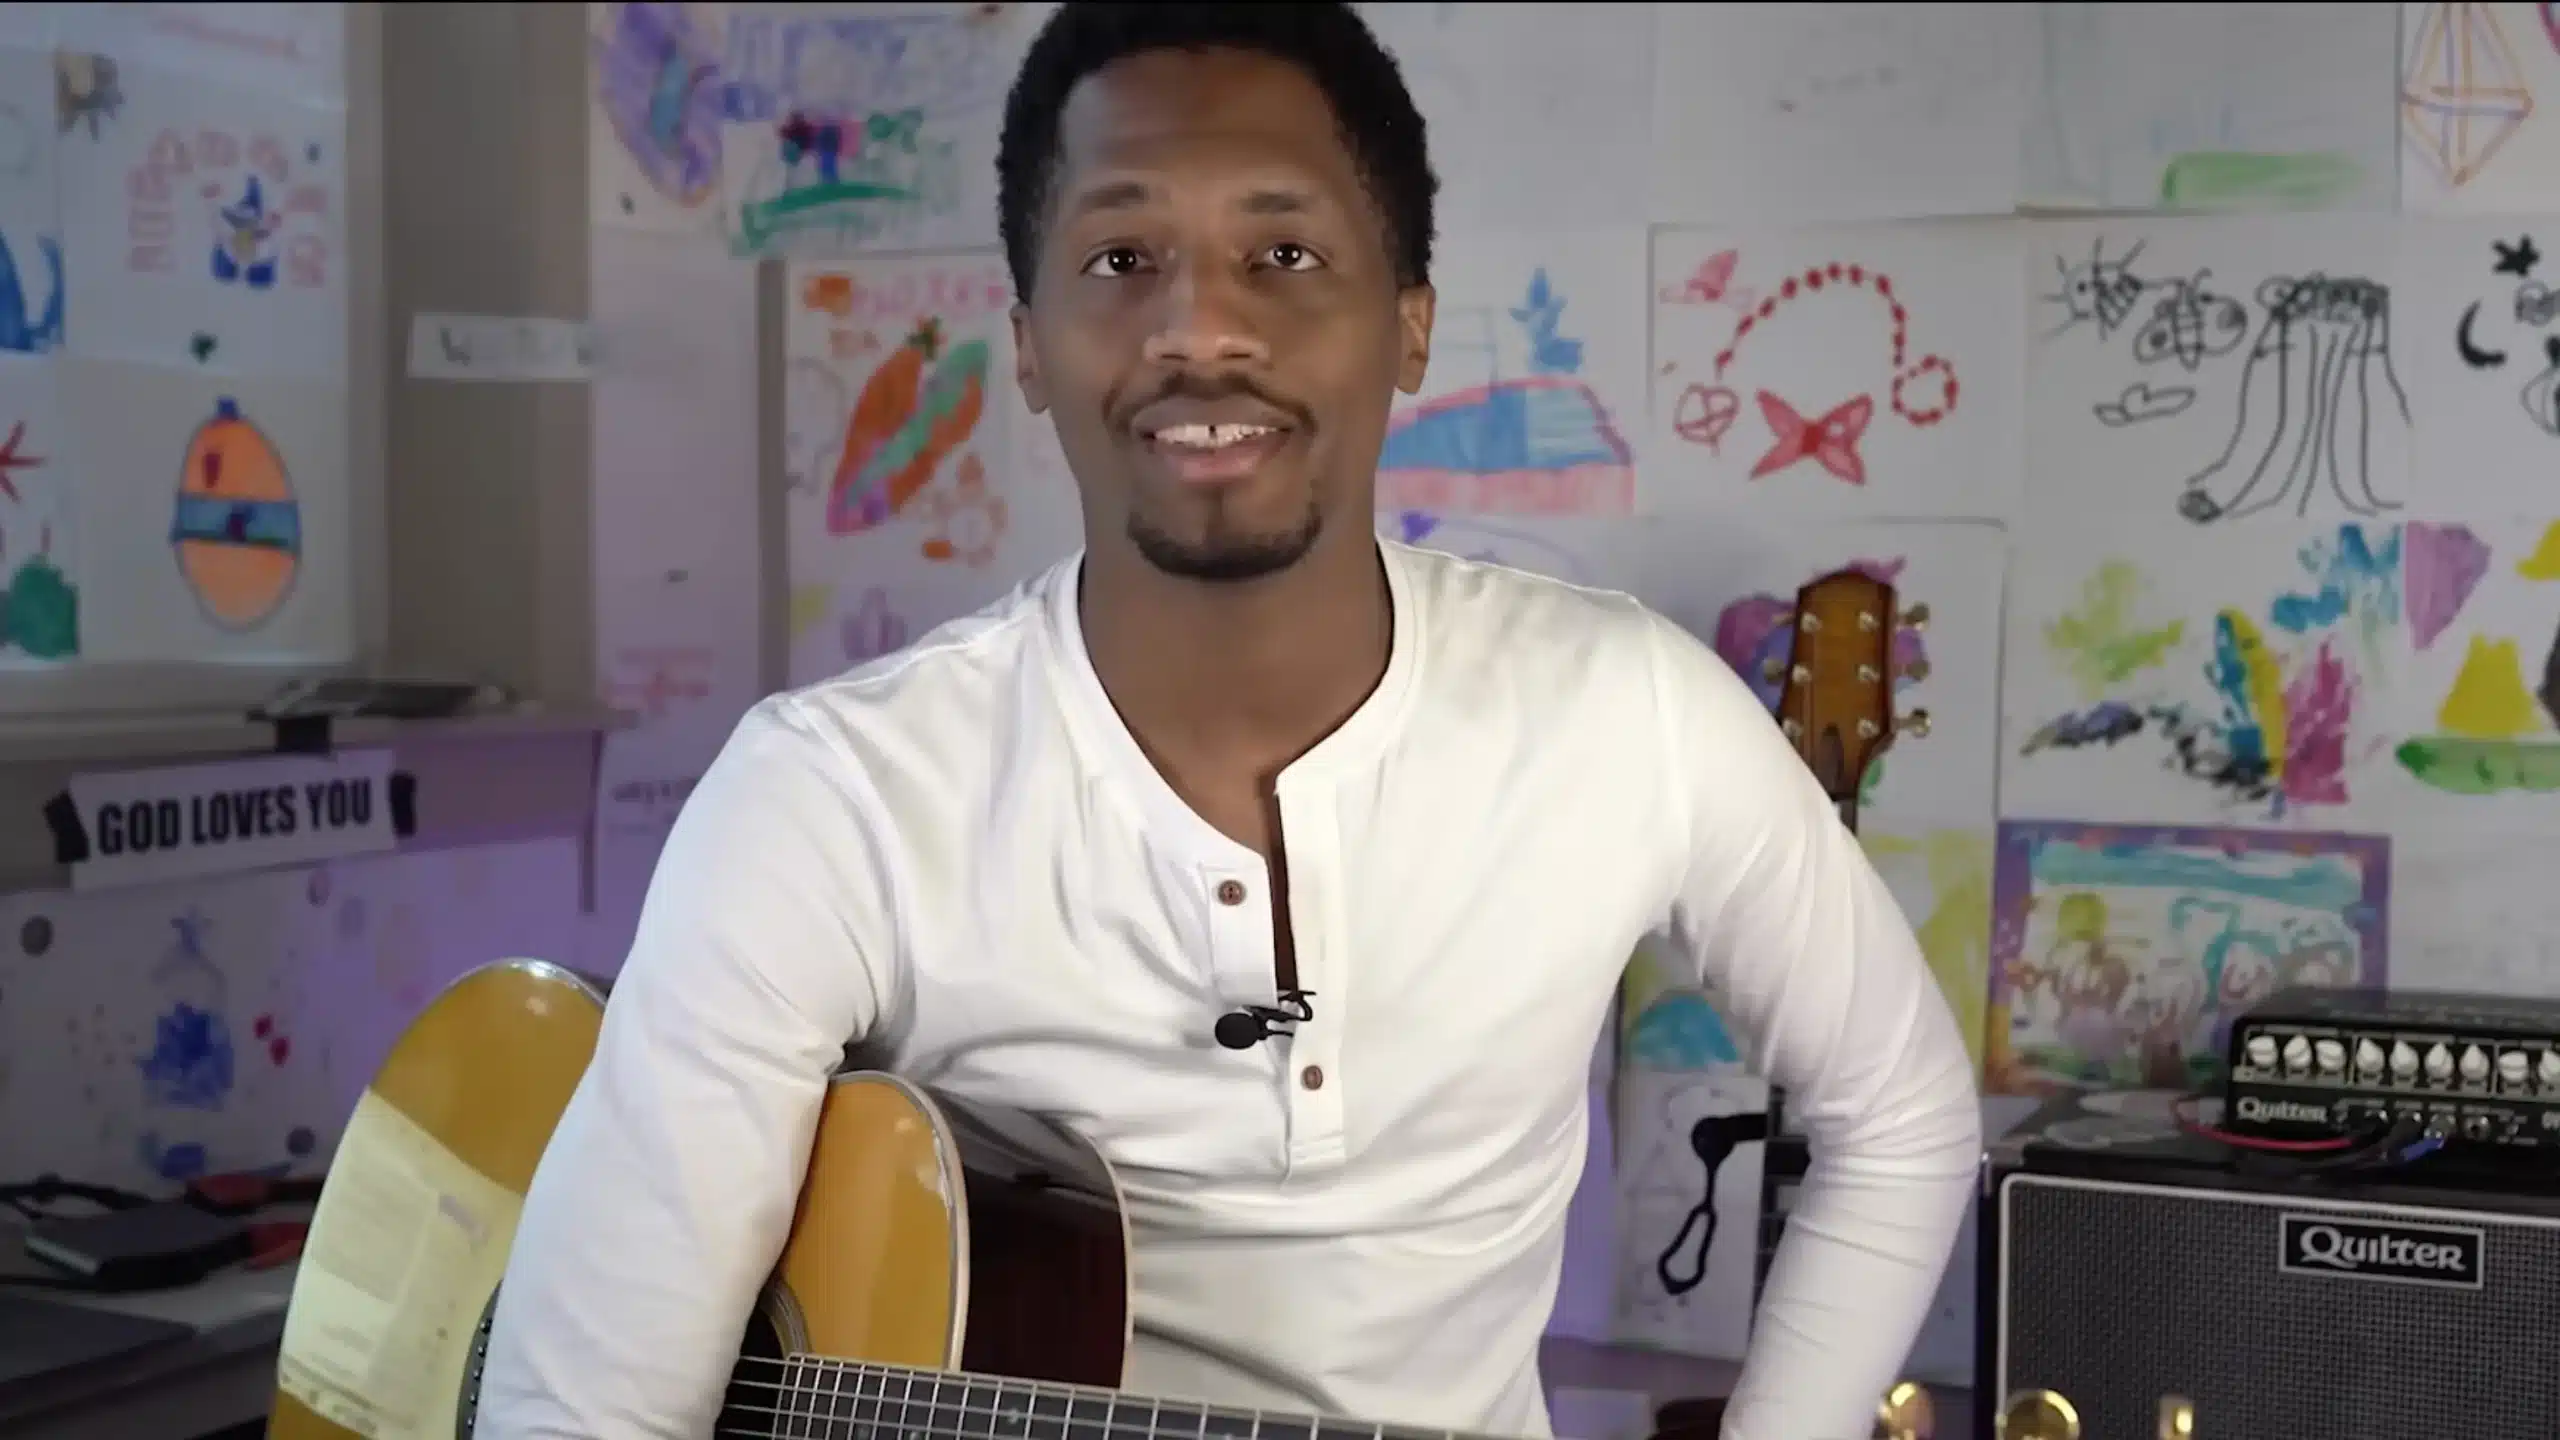 ron artis with his guitar and kids painting at the background